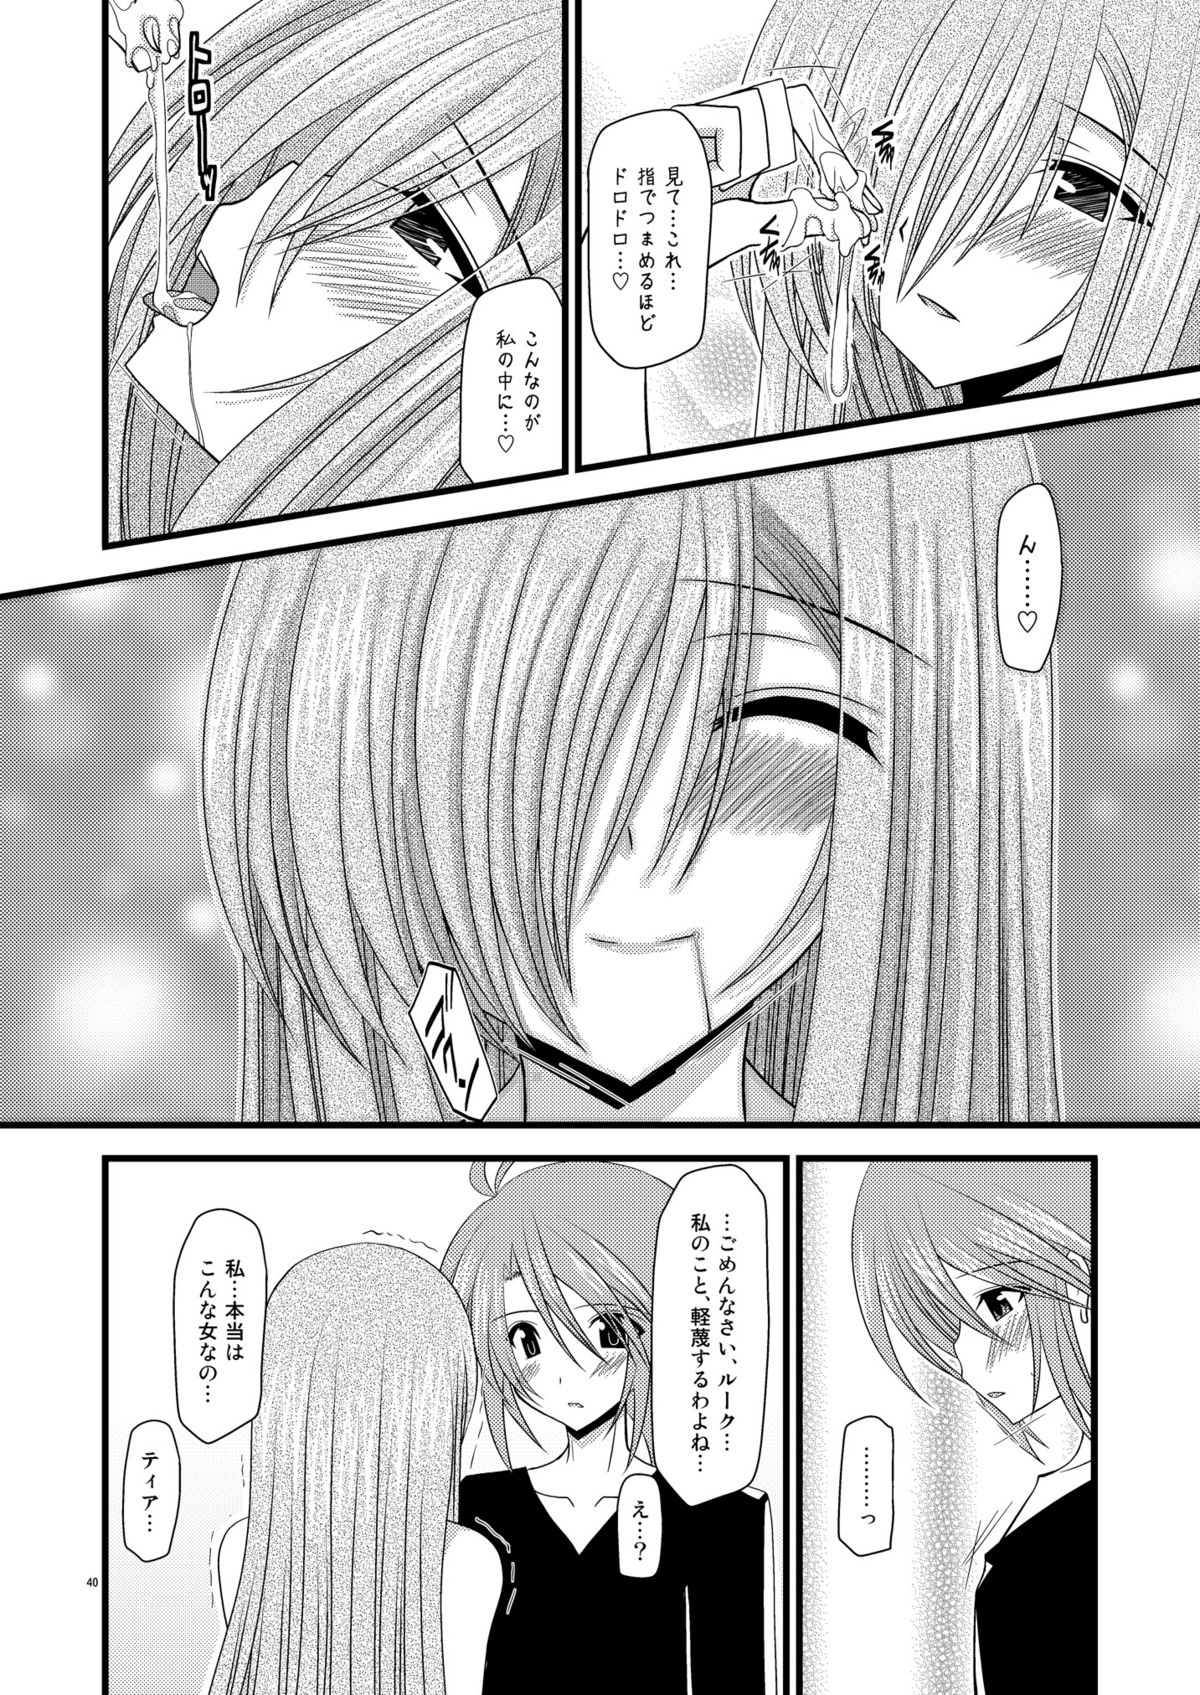 (SC41) [valssu] Melon Niku Bittake! V -the last- (Tales of the Abyss) page 40 full